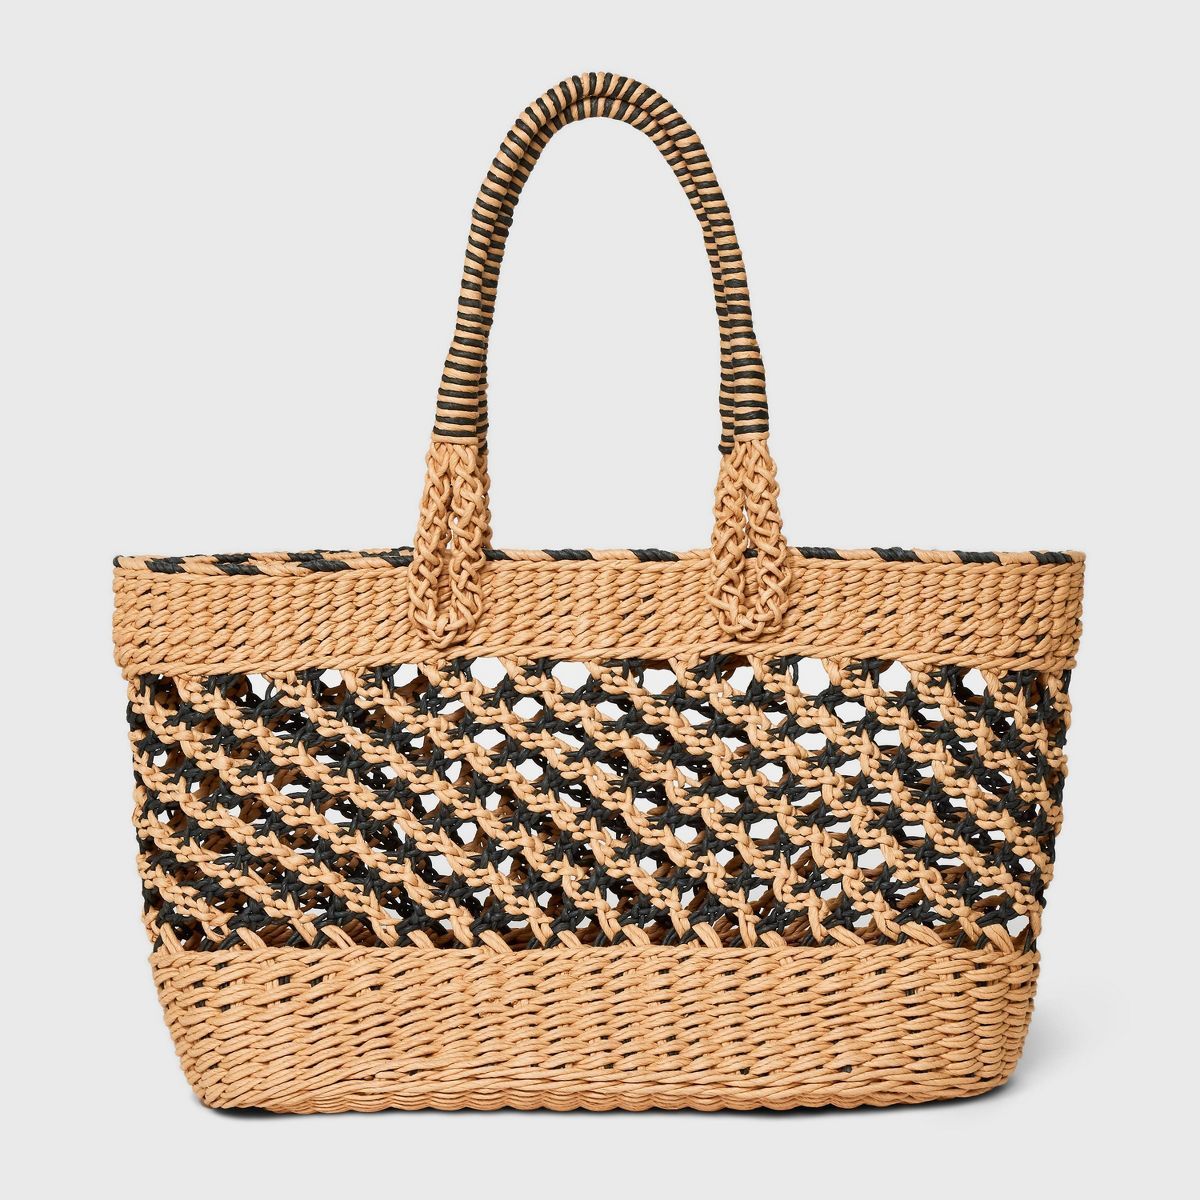 Large Straw Tote Handbag - A New Day™ Light Brown | Target